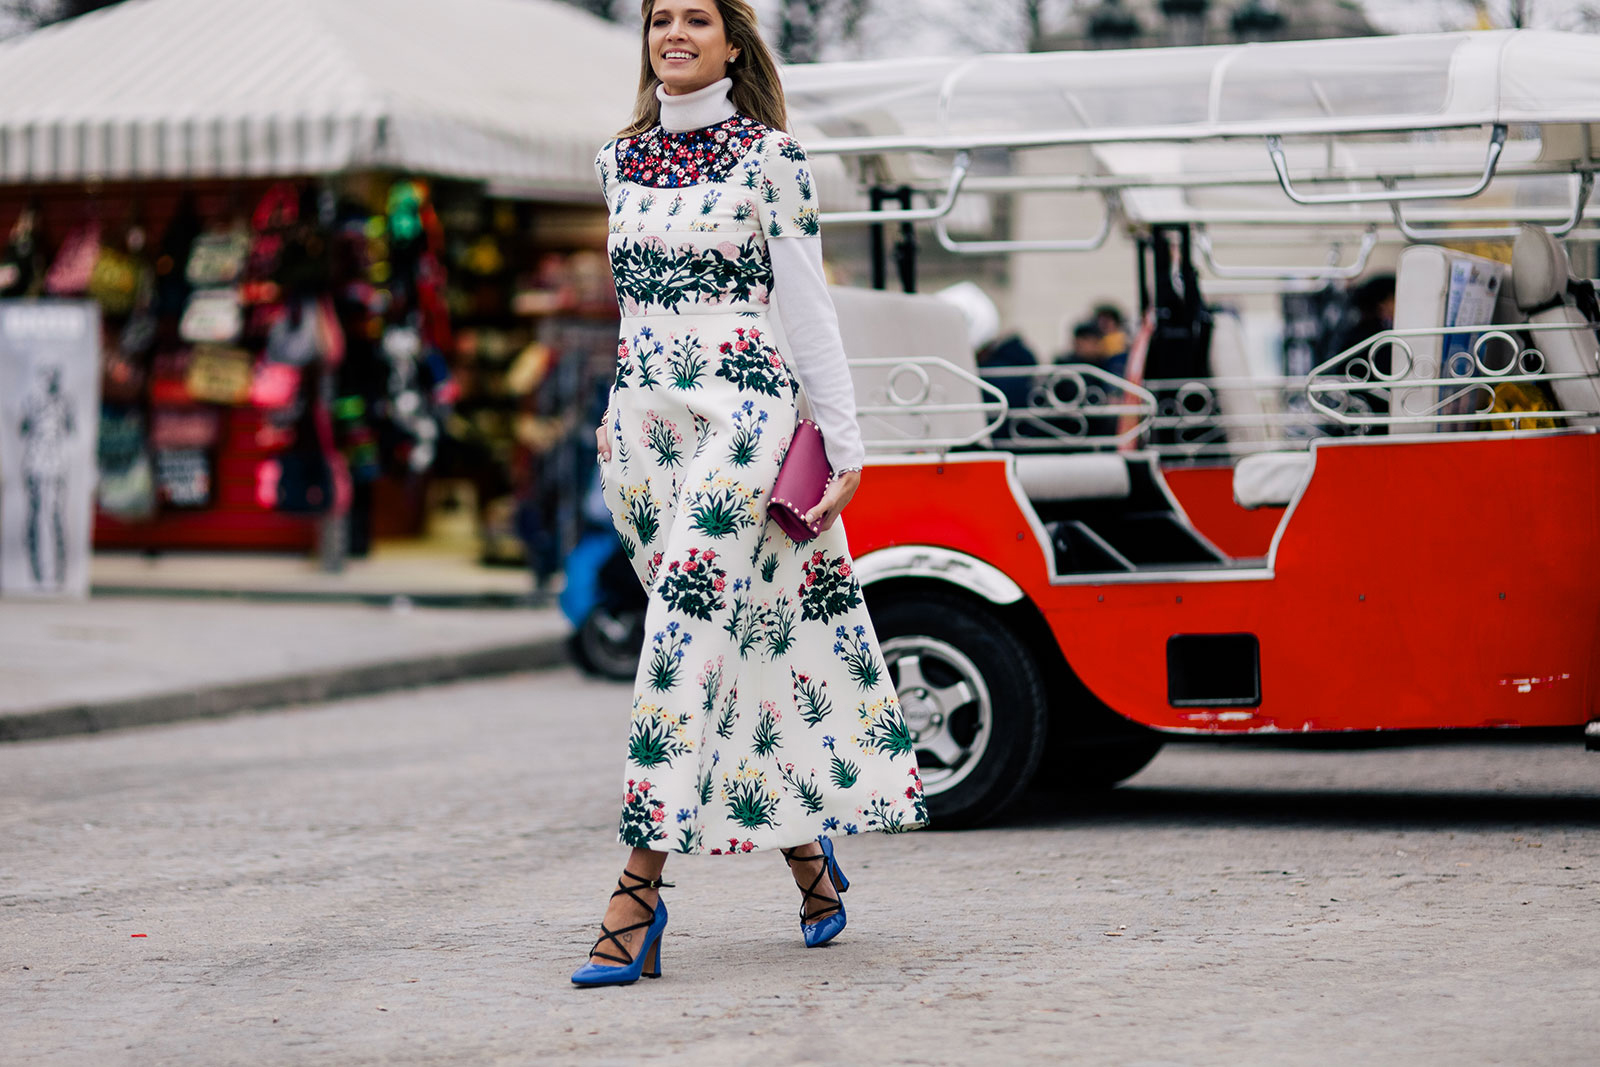 Helena Bordon wearing a long floral Valentino dress, Valentino shoes and clutch bag before the Valentino Fall/Winter 2015-2016 fashion show at the Tuileries in Paris, France